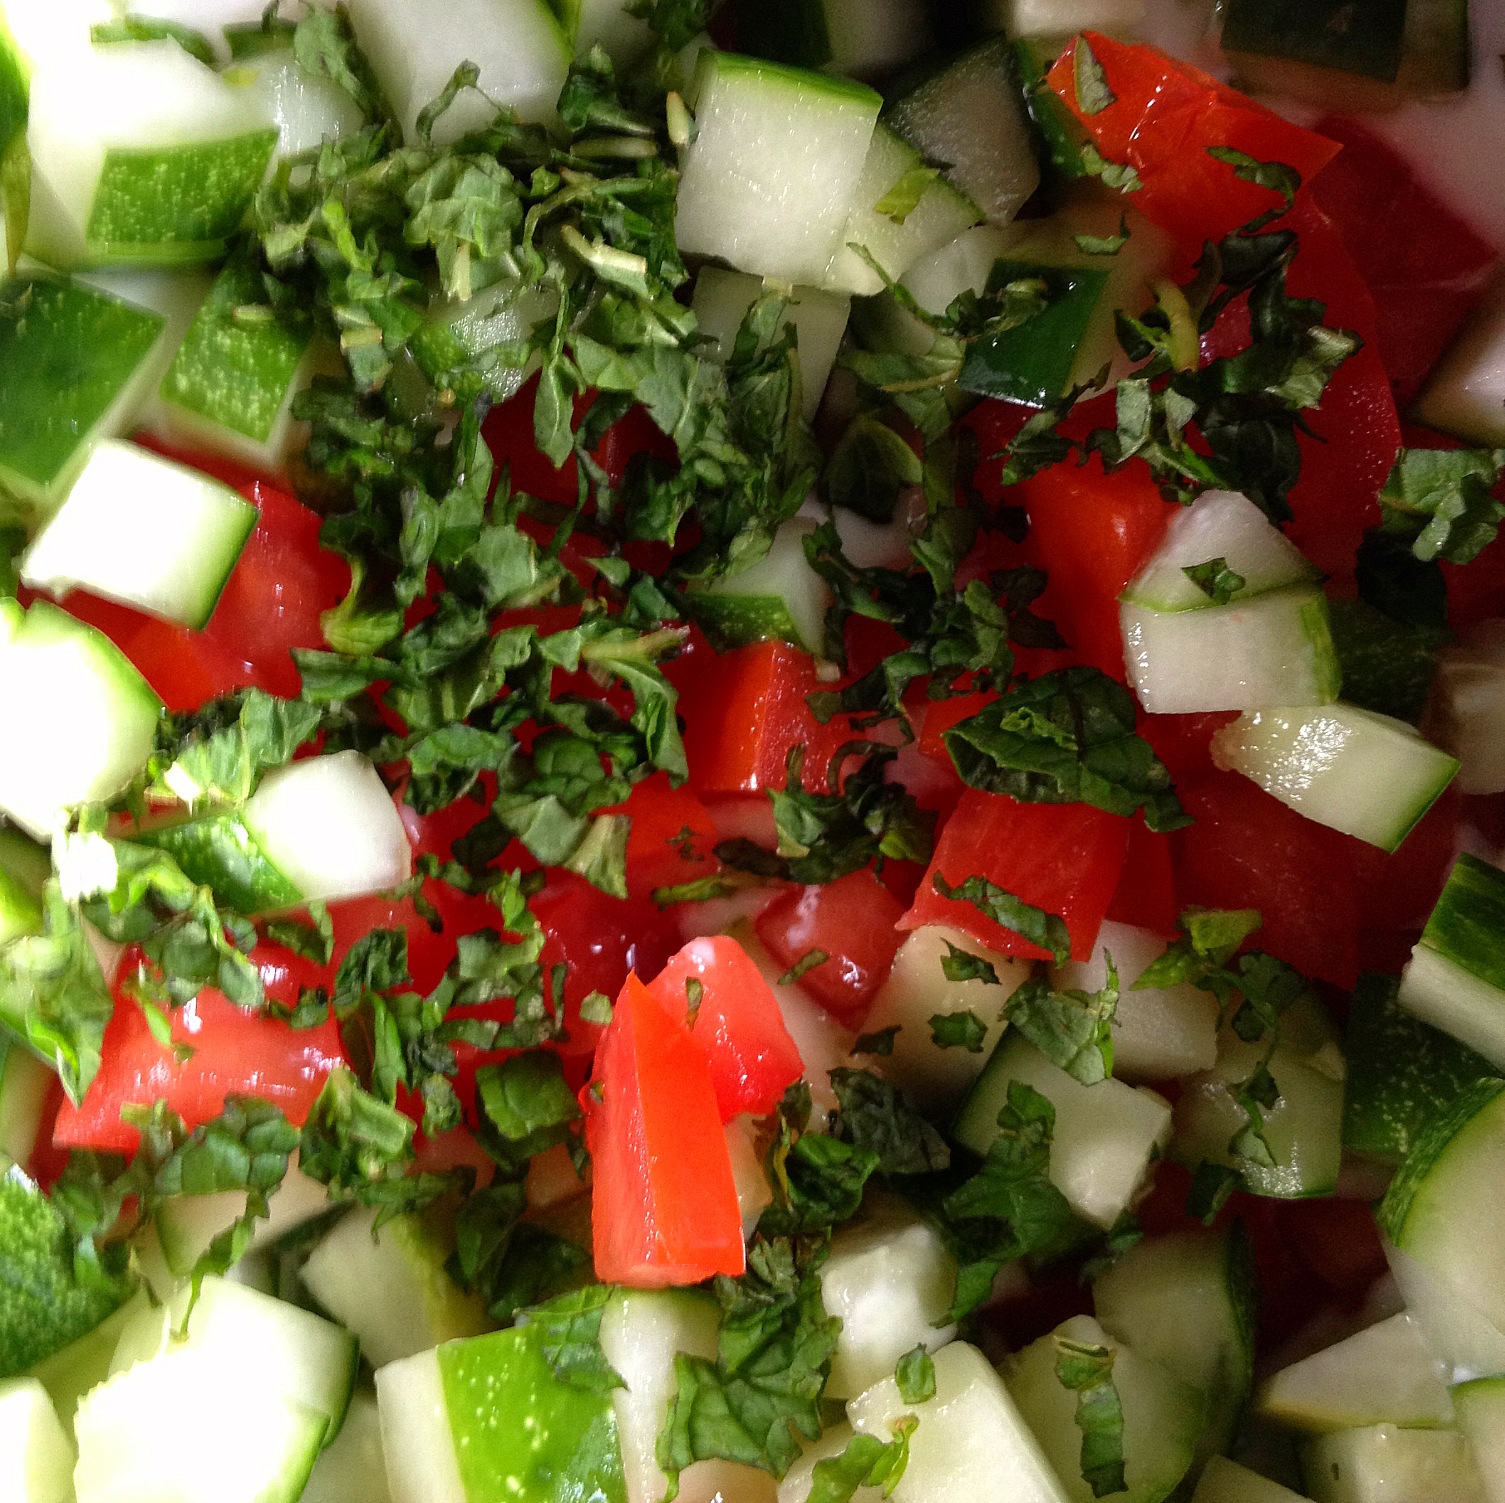 Mixture of fresh tomatoes, cucumber, and mint leaves